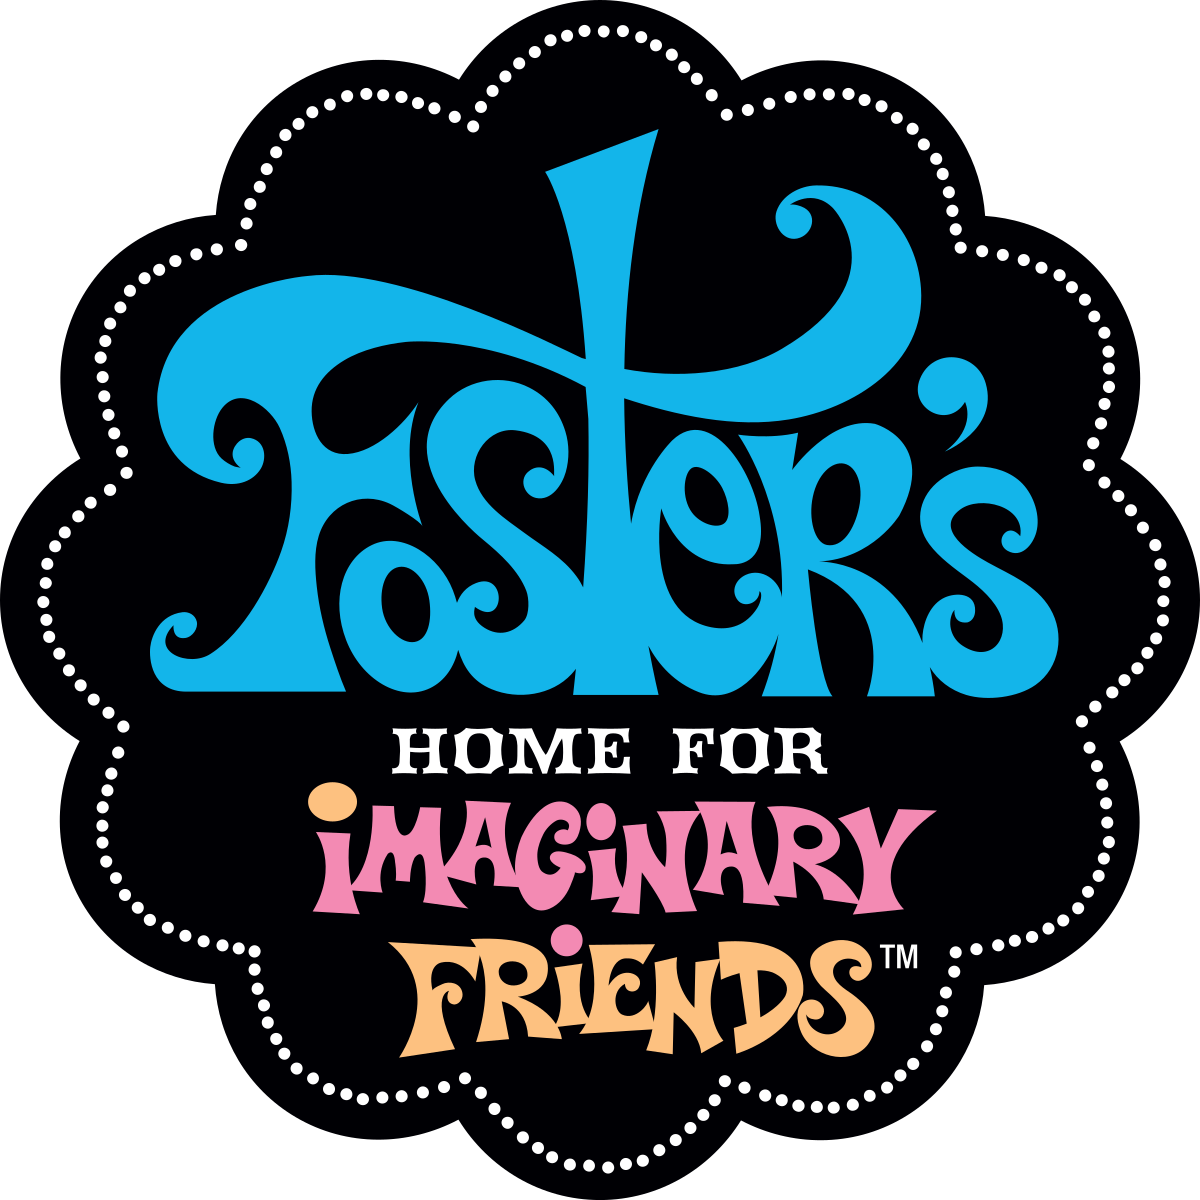 Foster's Home for Imaginary Friends logo.